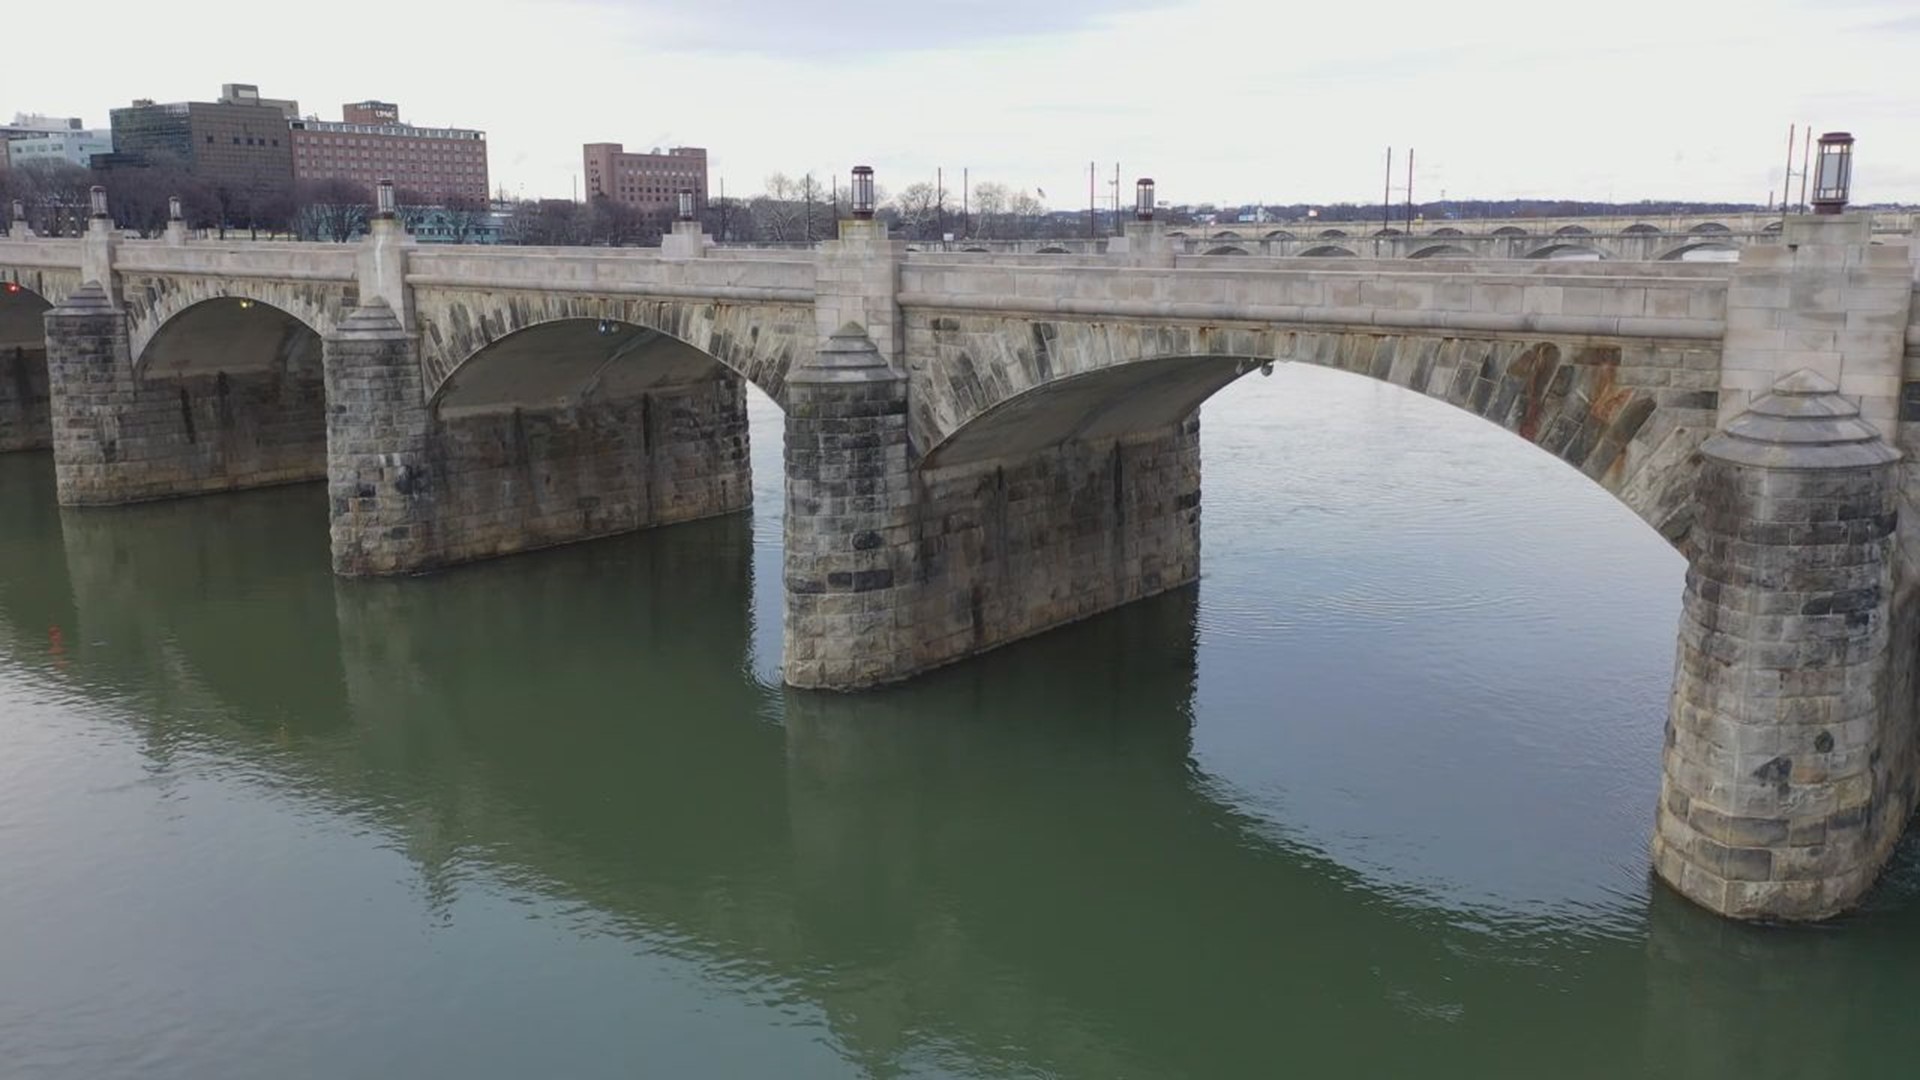 The bridge has spanned the Susquehanna River for nearly 100 years and is in need of some major repairs.